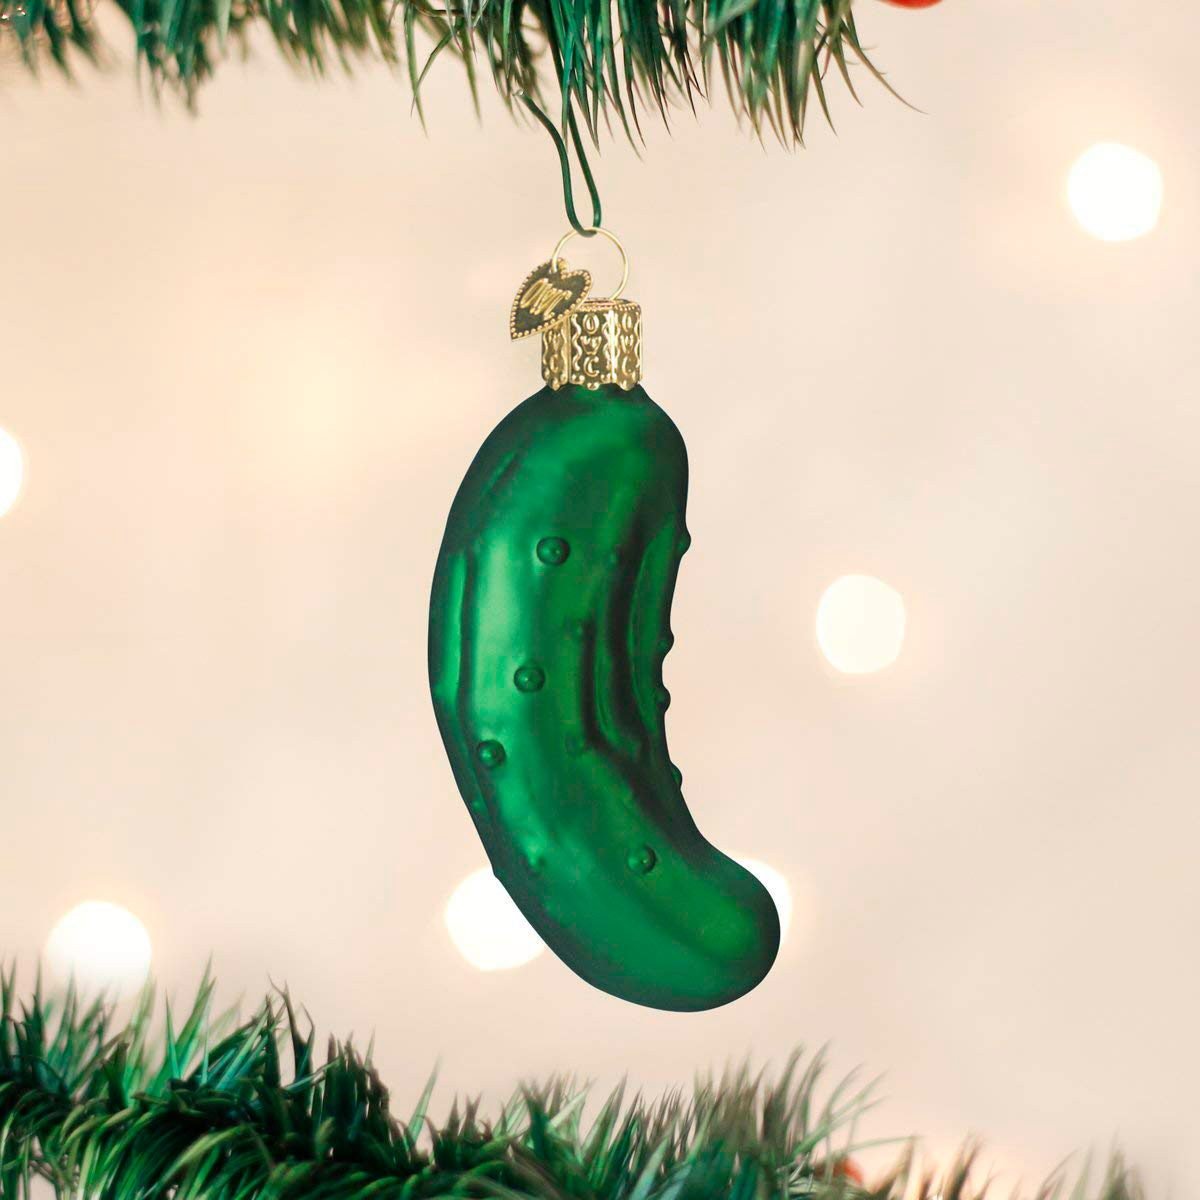 Why Do People Hang a Pickle on Their Christmas Tree?